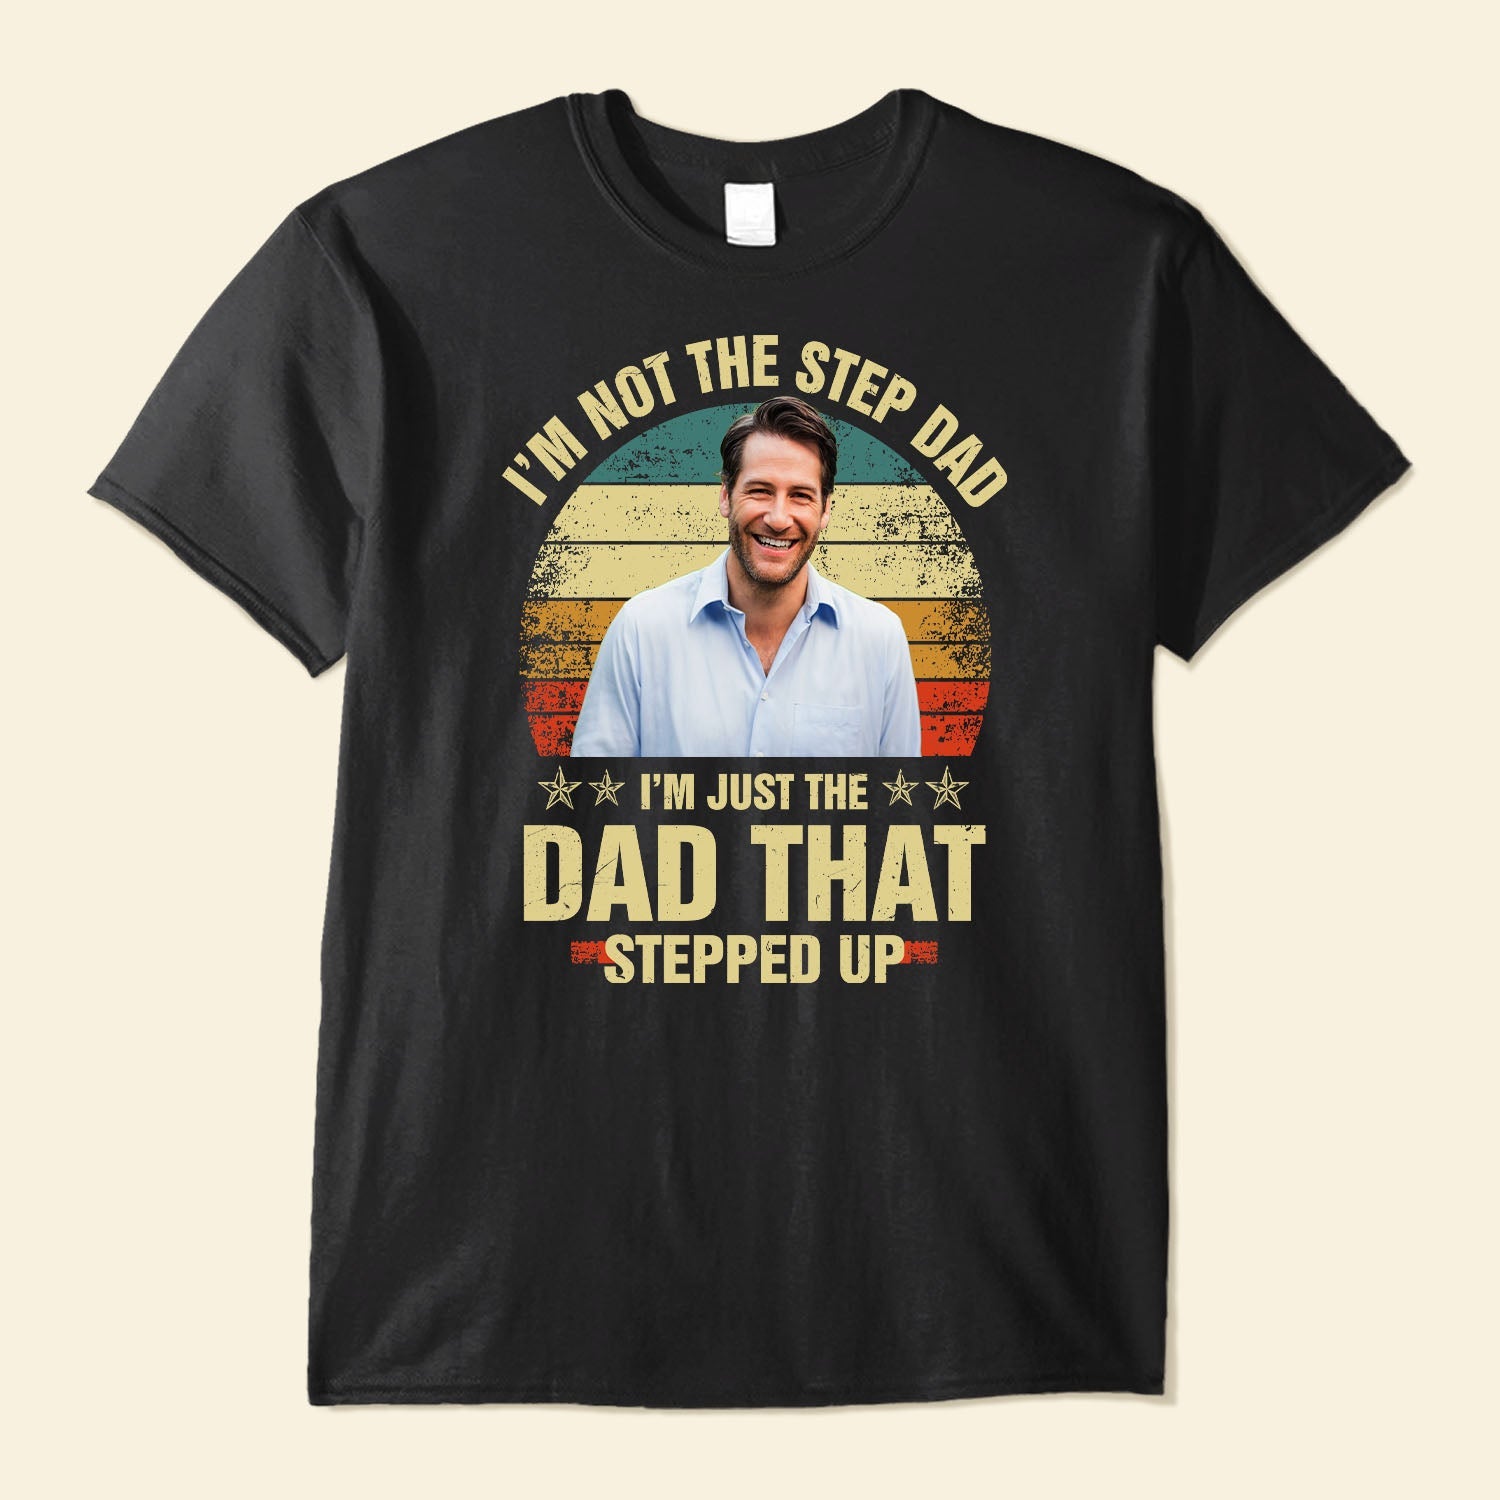 fathers day shirt, father's day shirt, funny dad shirt, shirt for dad, t-shirt, fathers day gift, fathers day, happy fathers day, fathers day ideas, gift for fathers day, father's day, tee, personalized shirt,